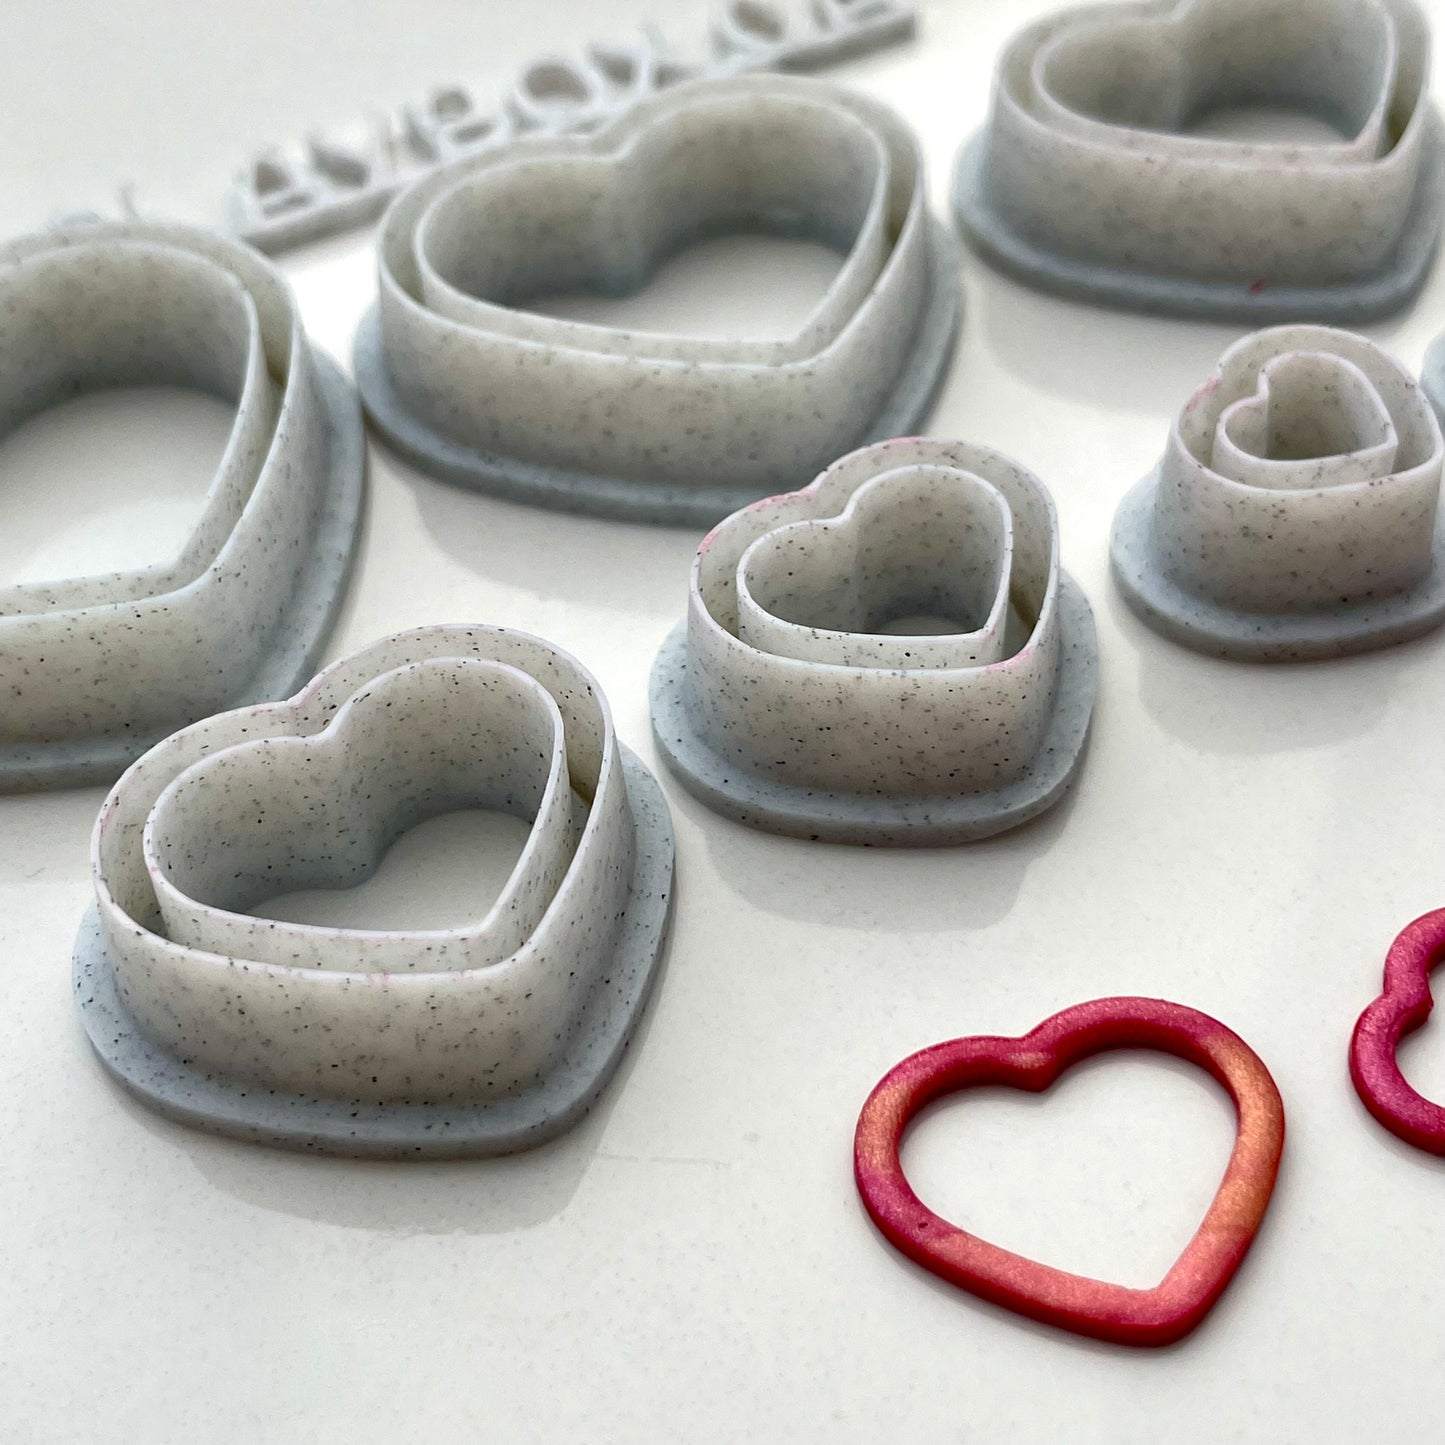 Skinny hearts donut set - made for use with polymer clay